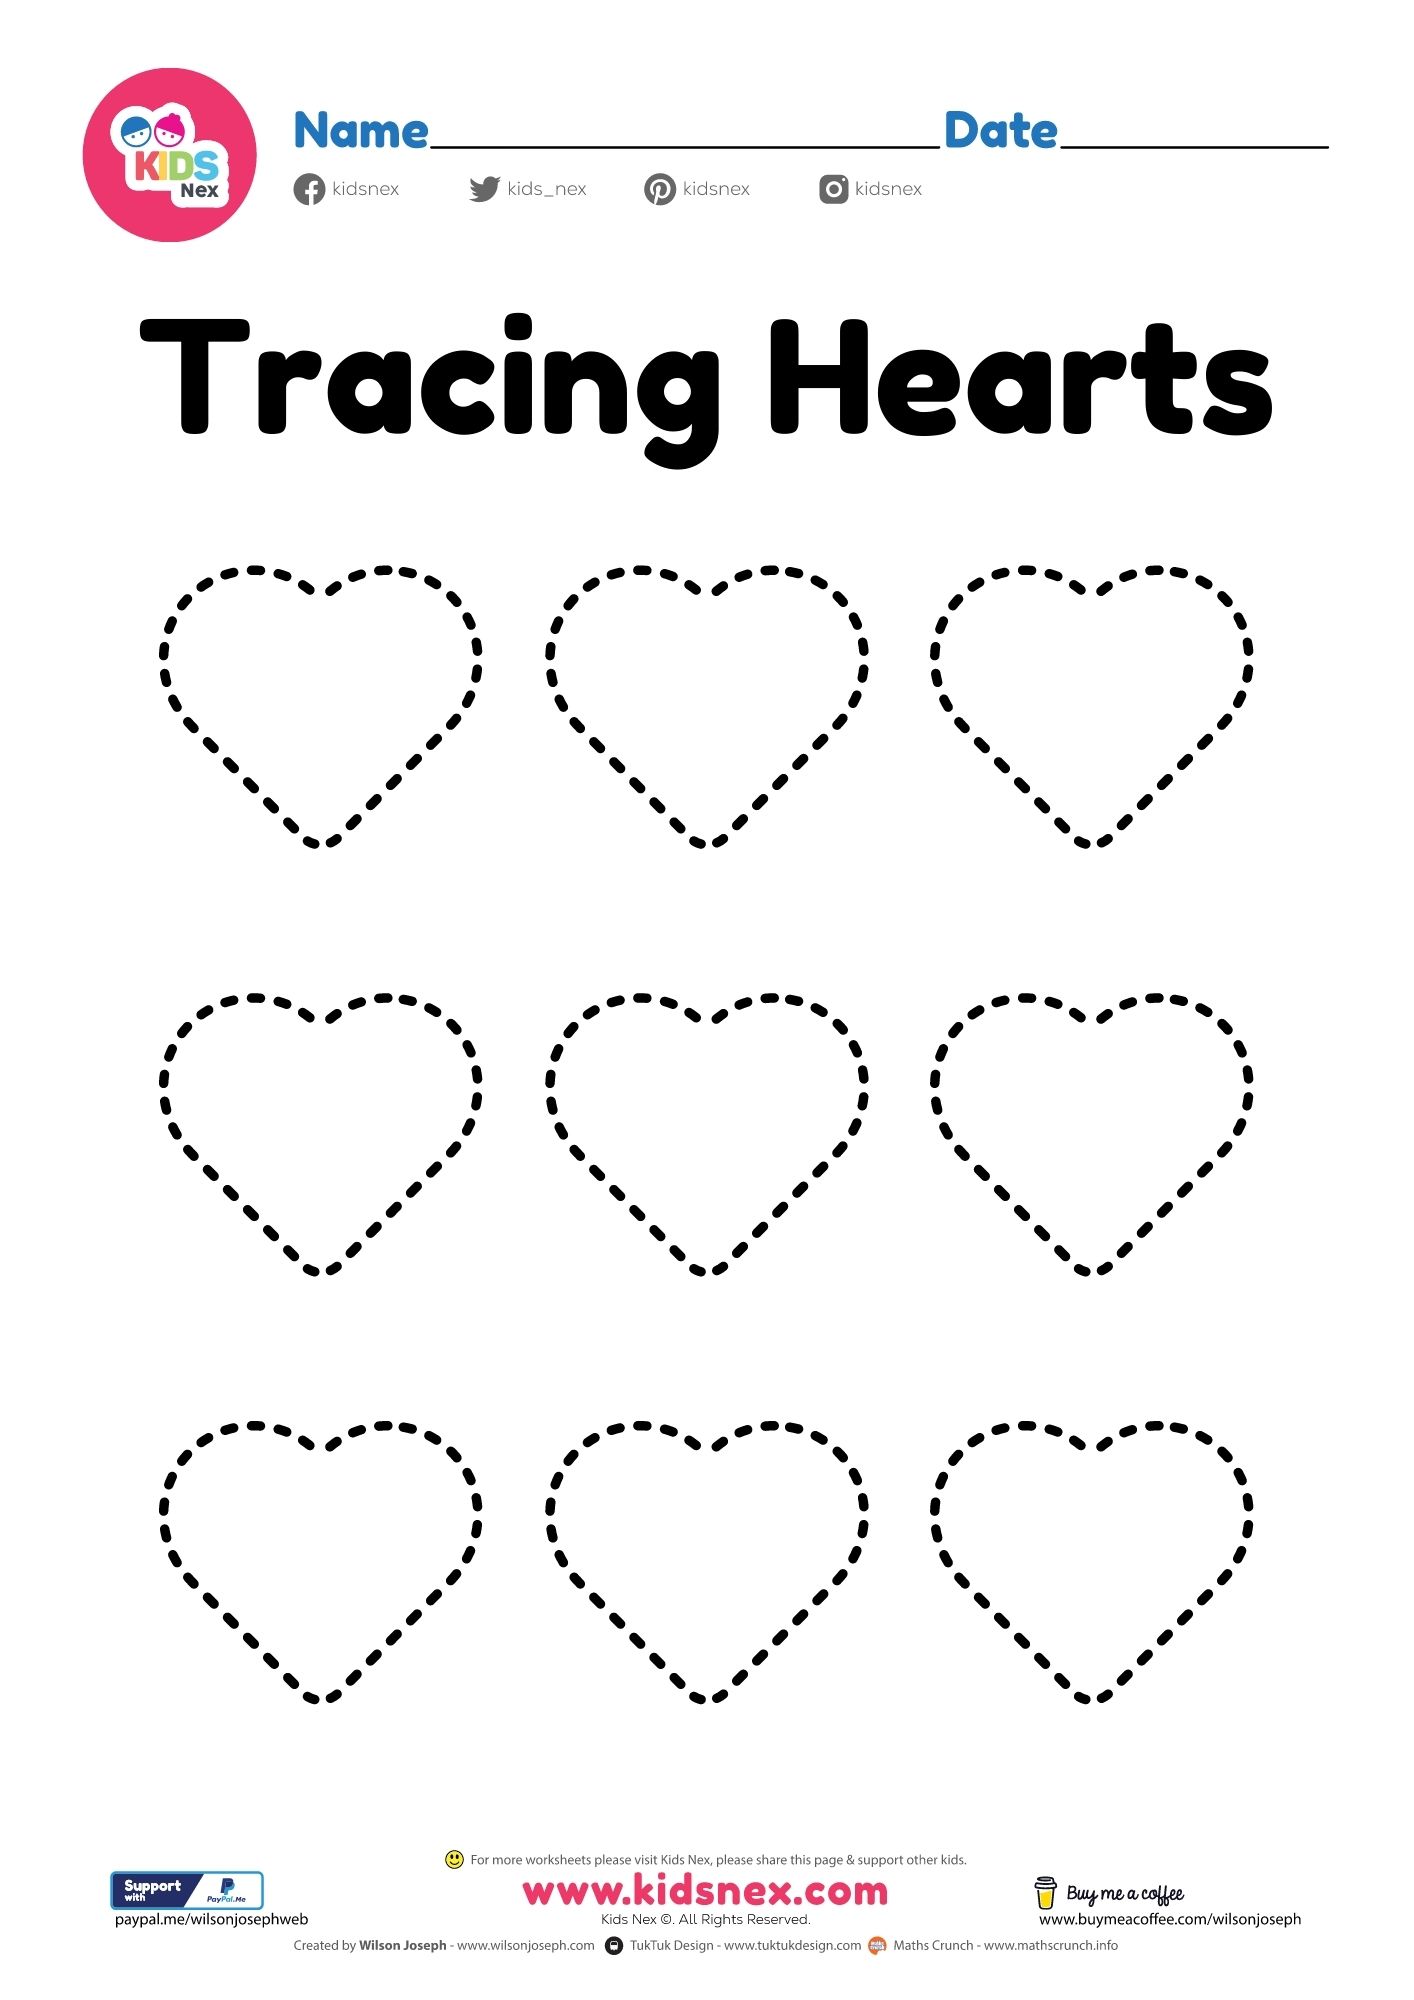 tracing-hearts-worksheet-free-printable-pdf-for-kids